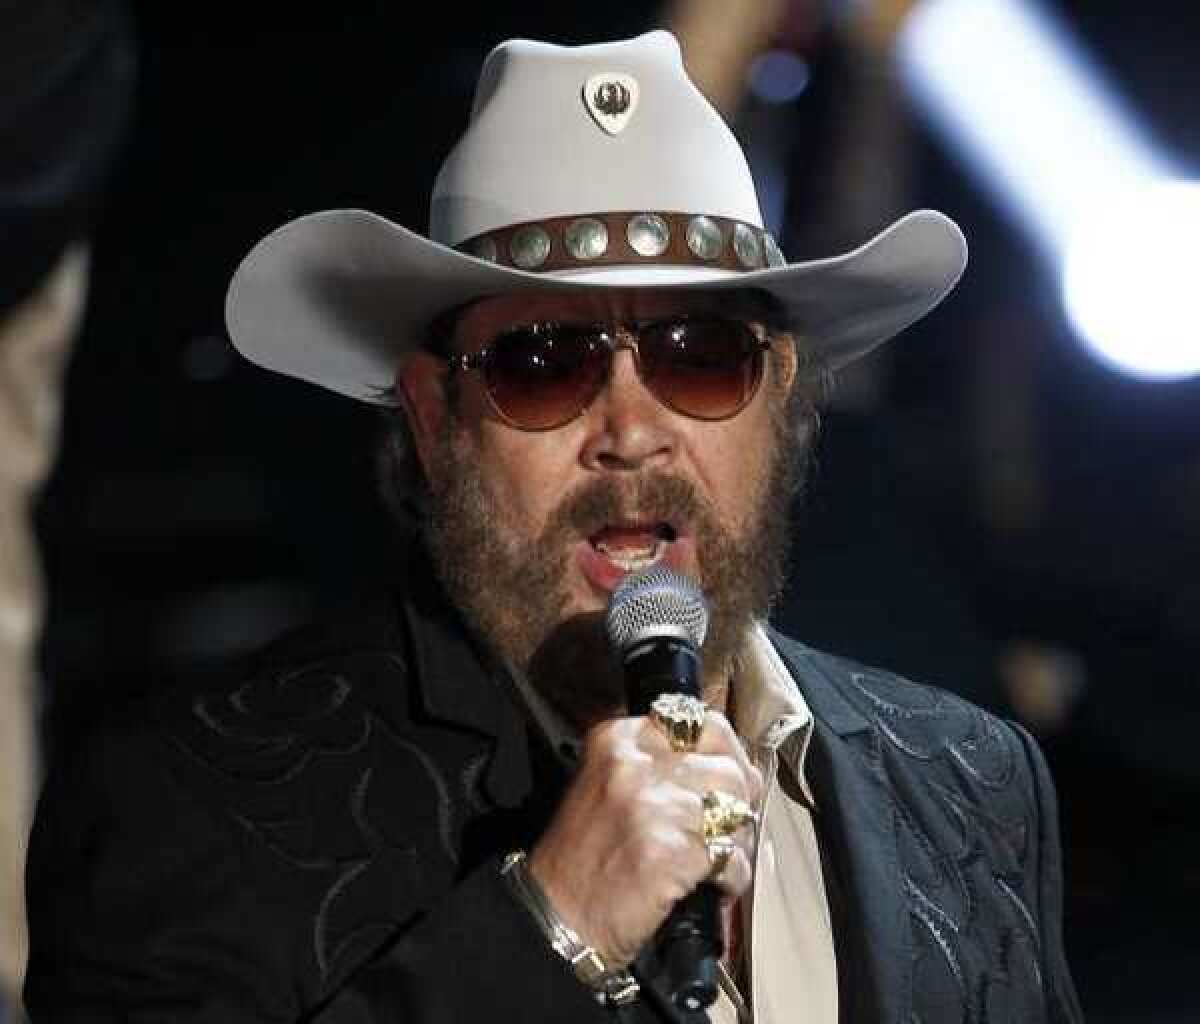 Hank Williams Jr. performs during the CMT Disaster Relief Concert in Nashville.